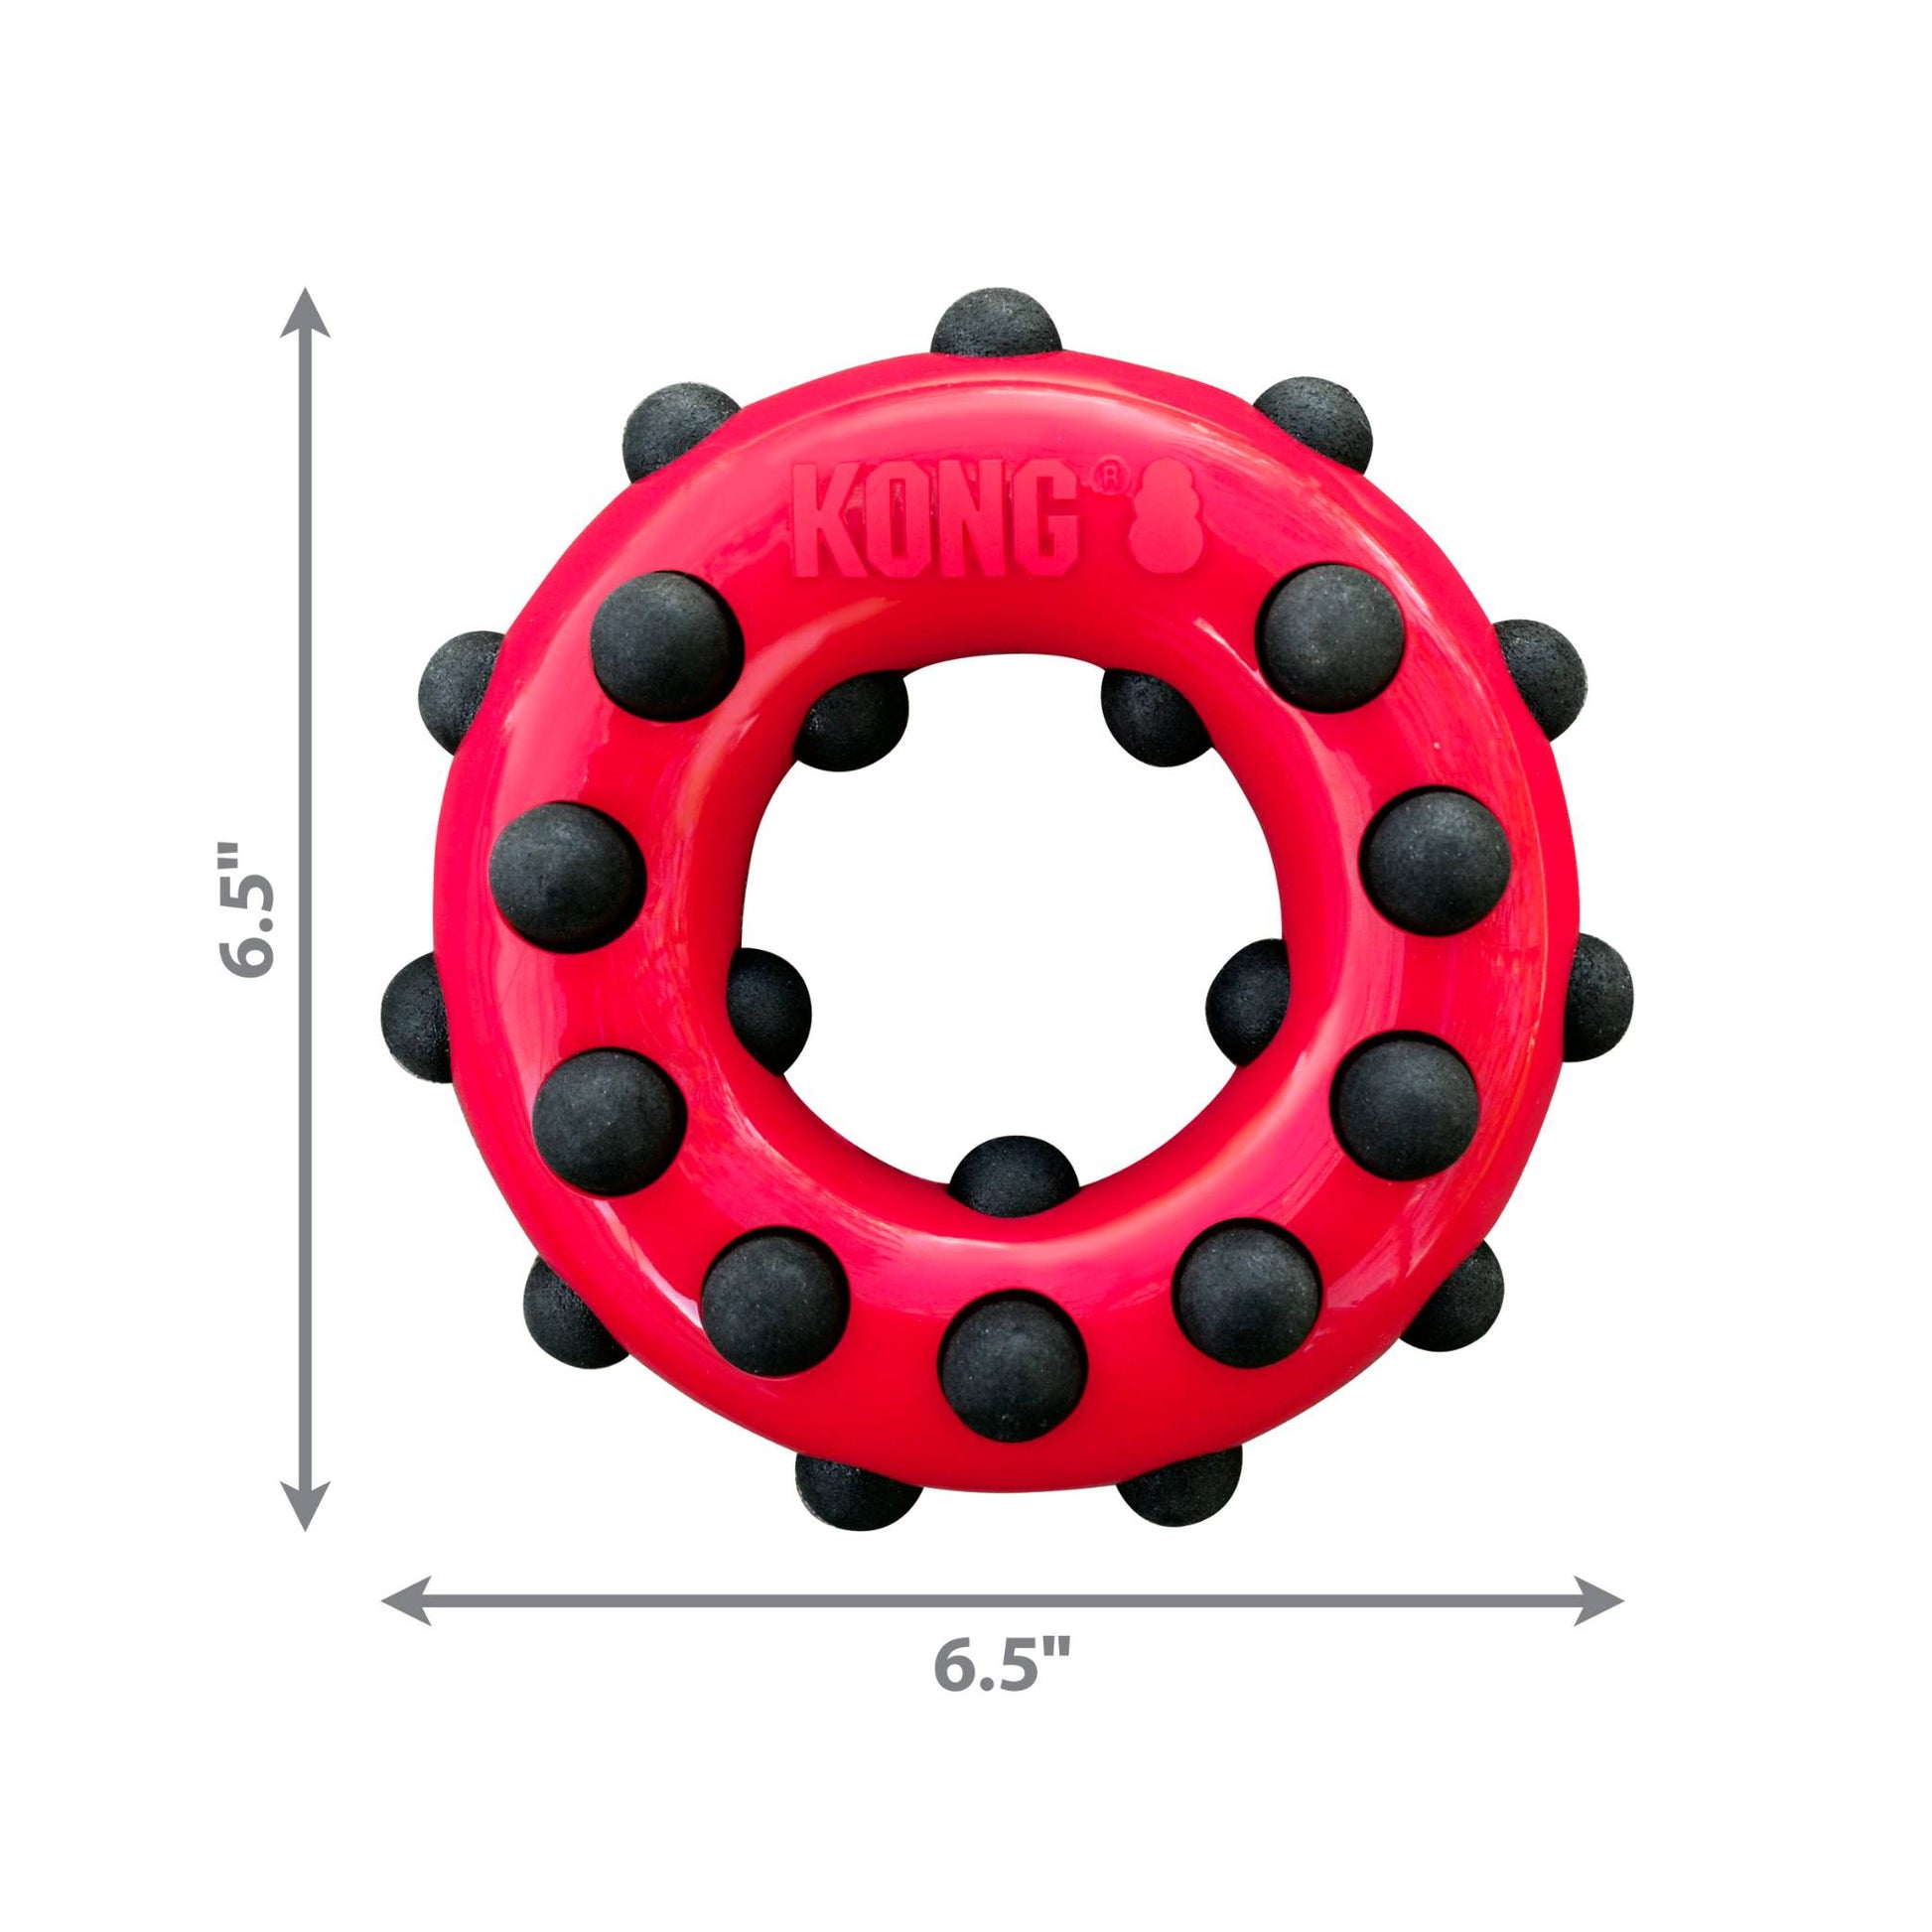 DIMENSIONS OF LARGE KONG DOTZ CIRCLE TOY